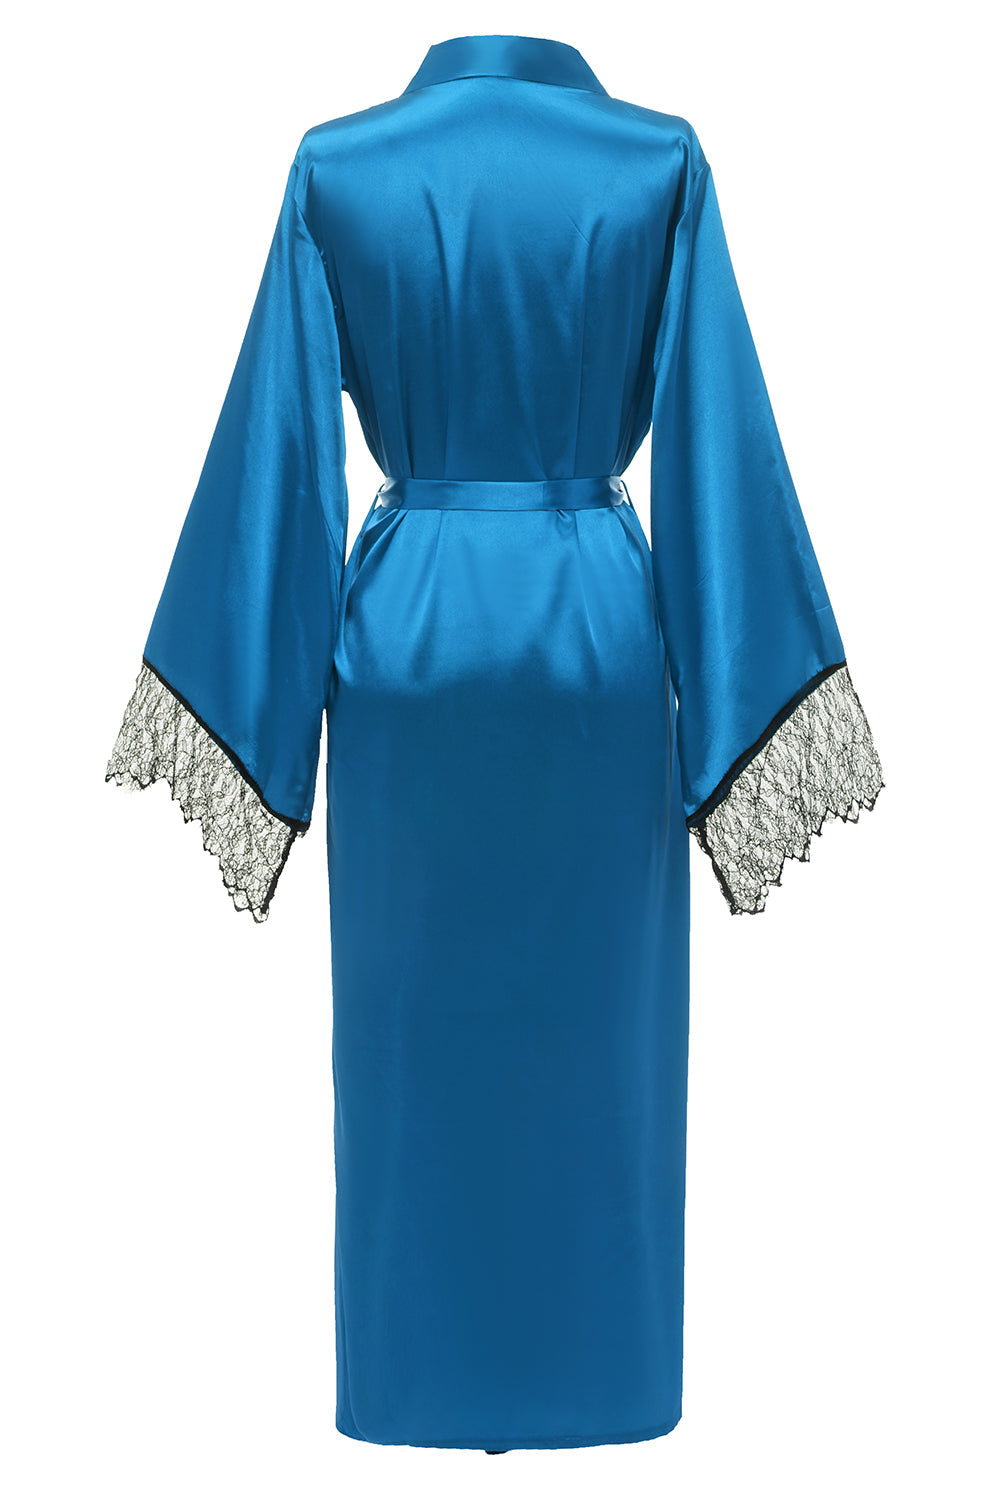 Blue Bridesamaid Robe With Lace